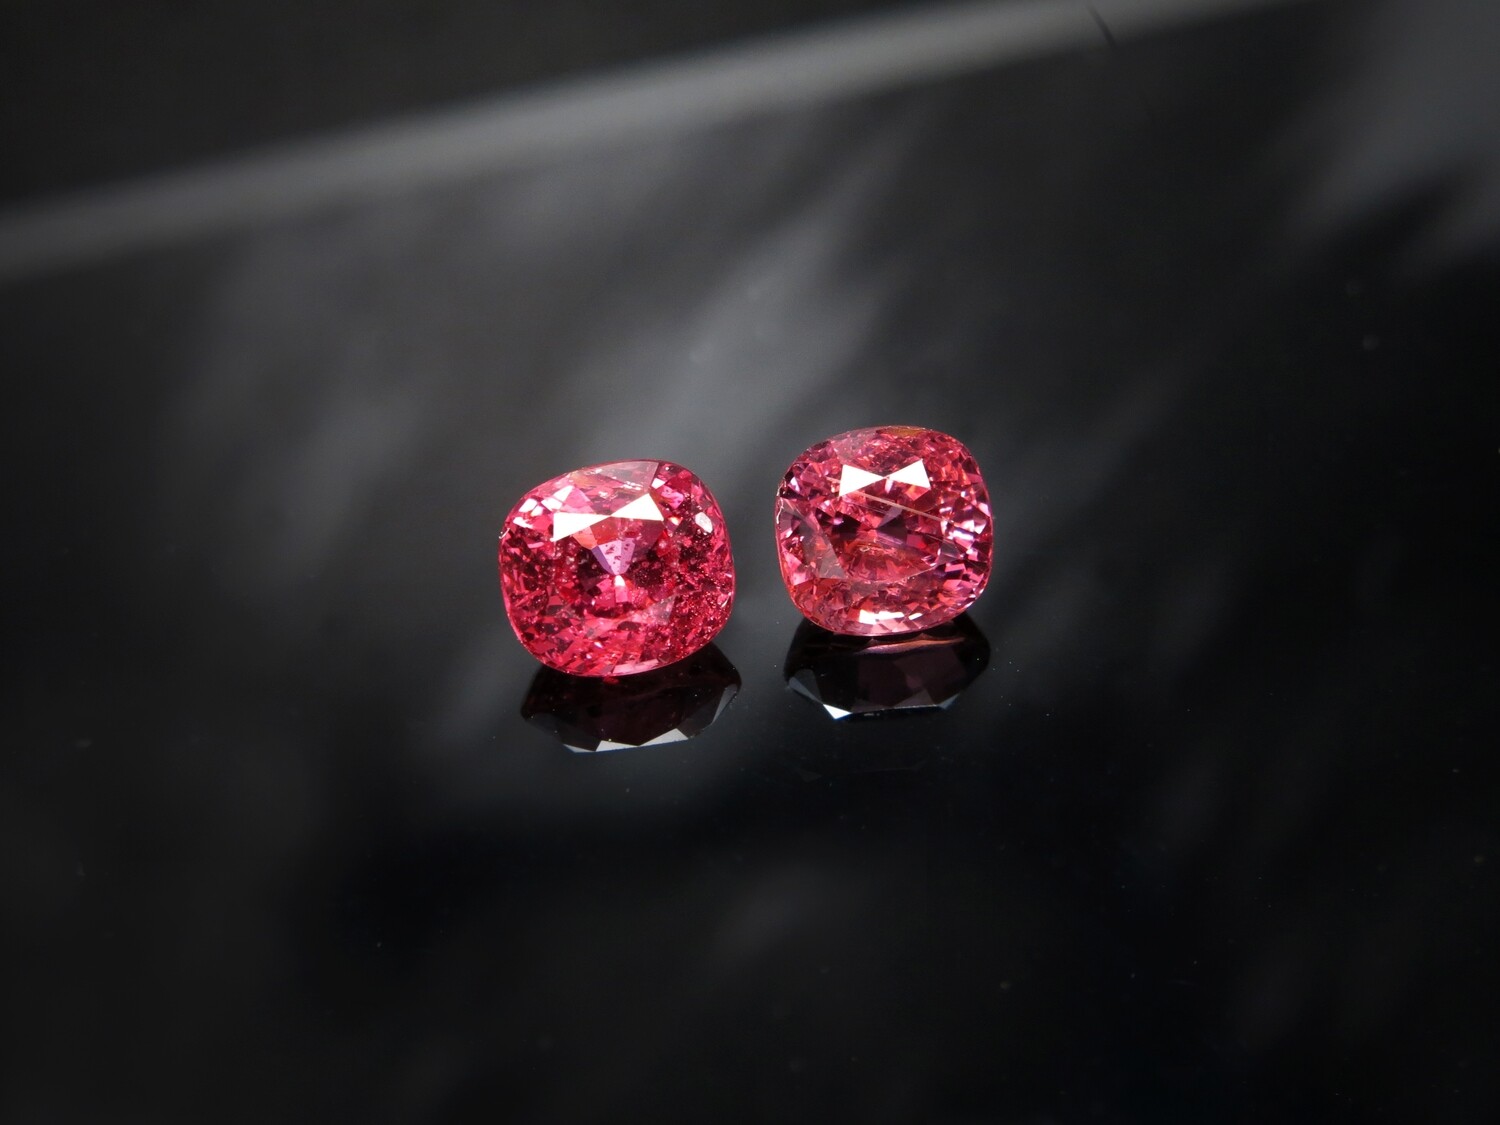 Spinel Cushion cut pair 1.53 ct and 1.57 ct